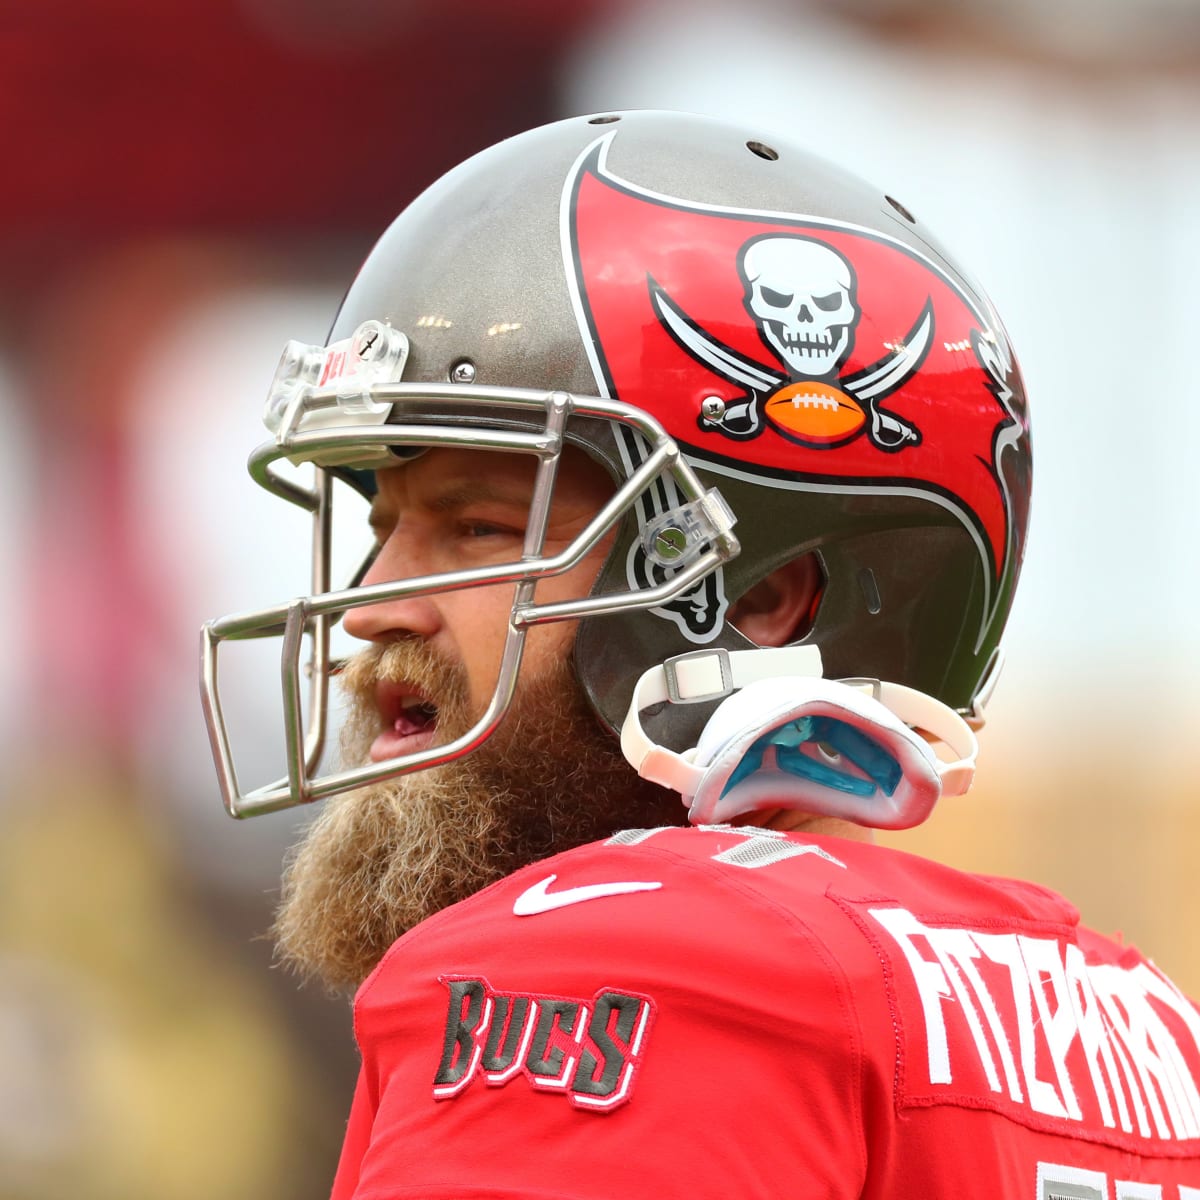 Bucs' Ryan Fitzpatrick thought his Madden NFL rating was too high